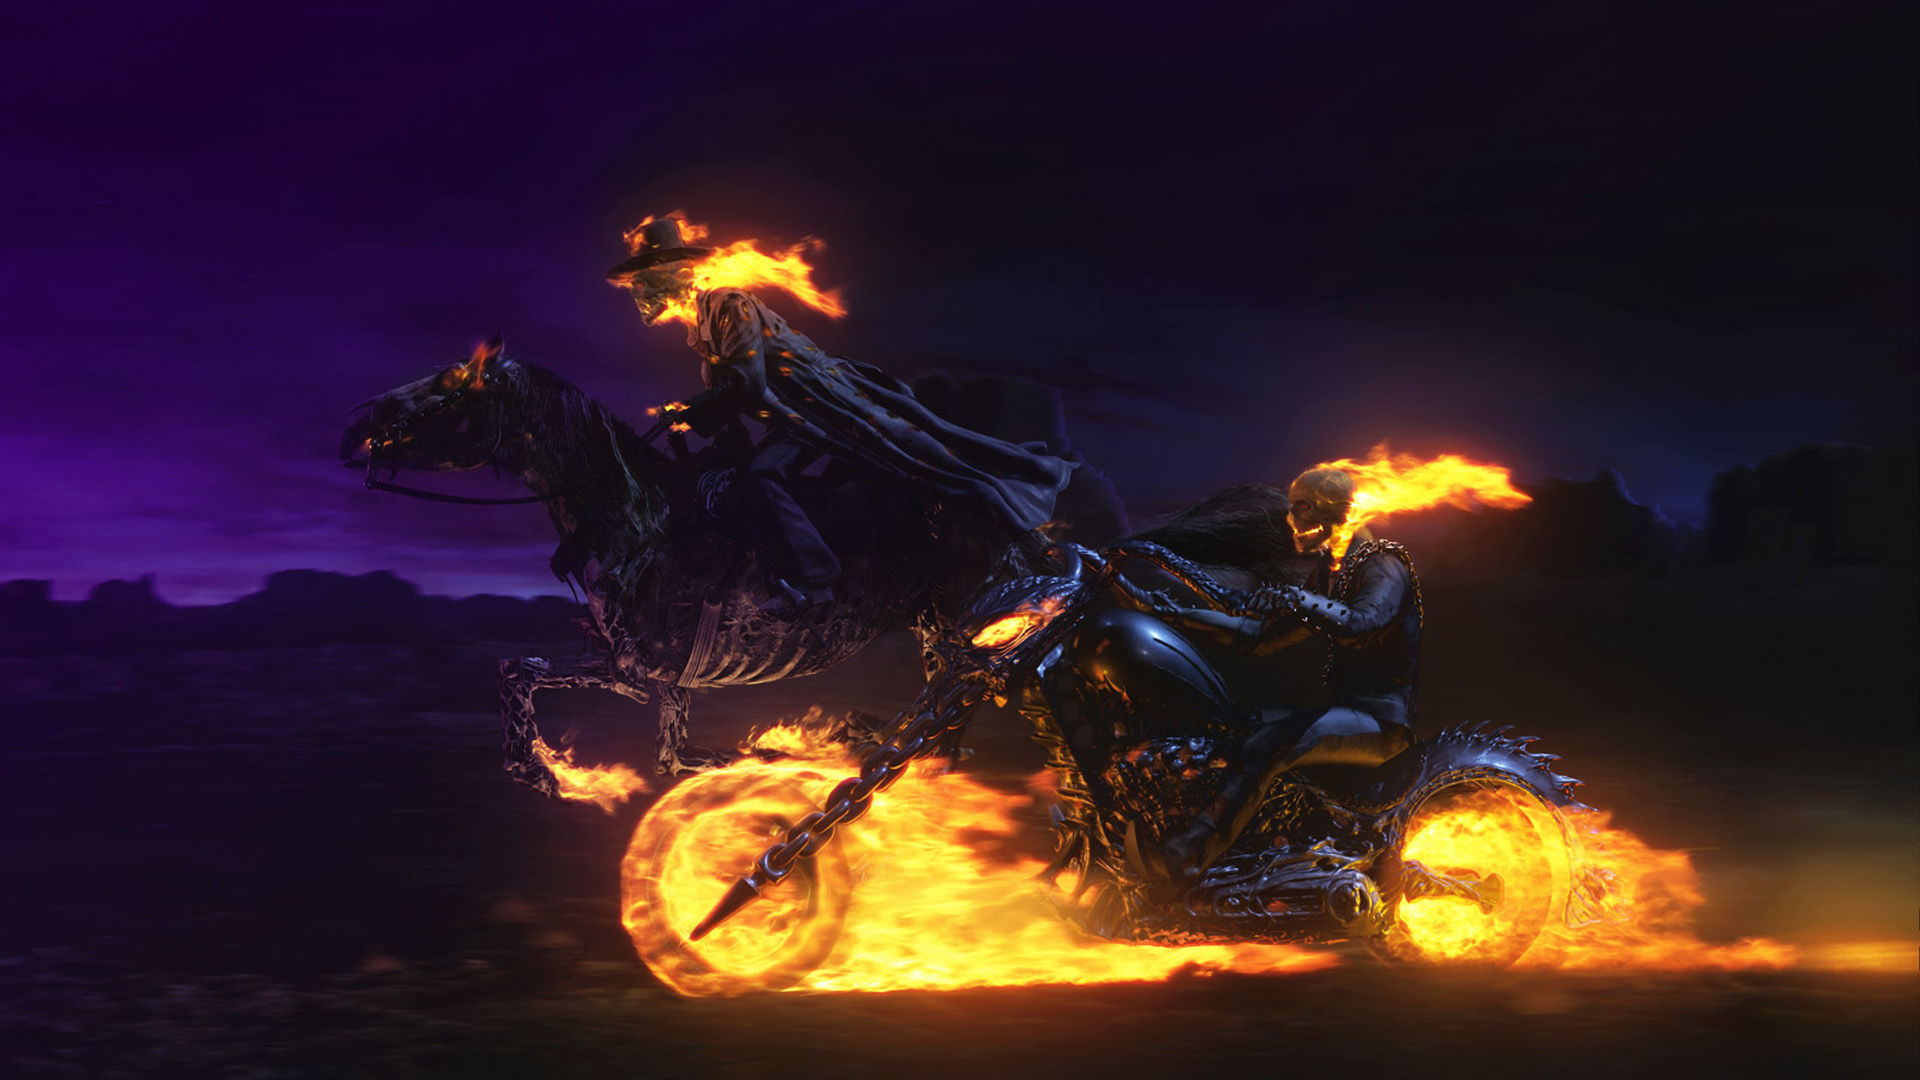 Ghost Rider Wallpaper 1920x1080 Wallpapers 1920x1080 Wallpapers